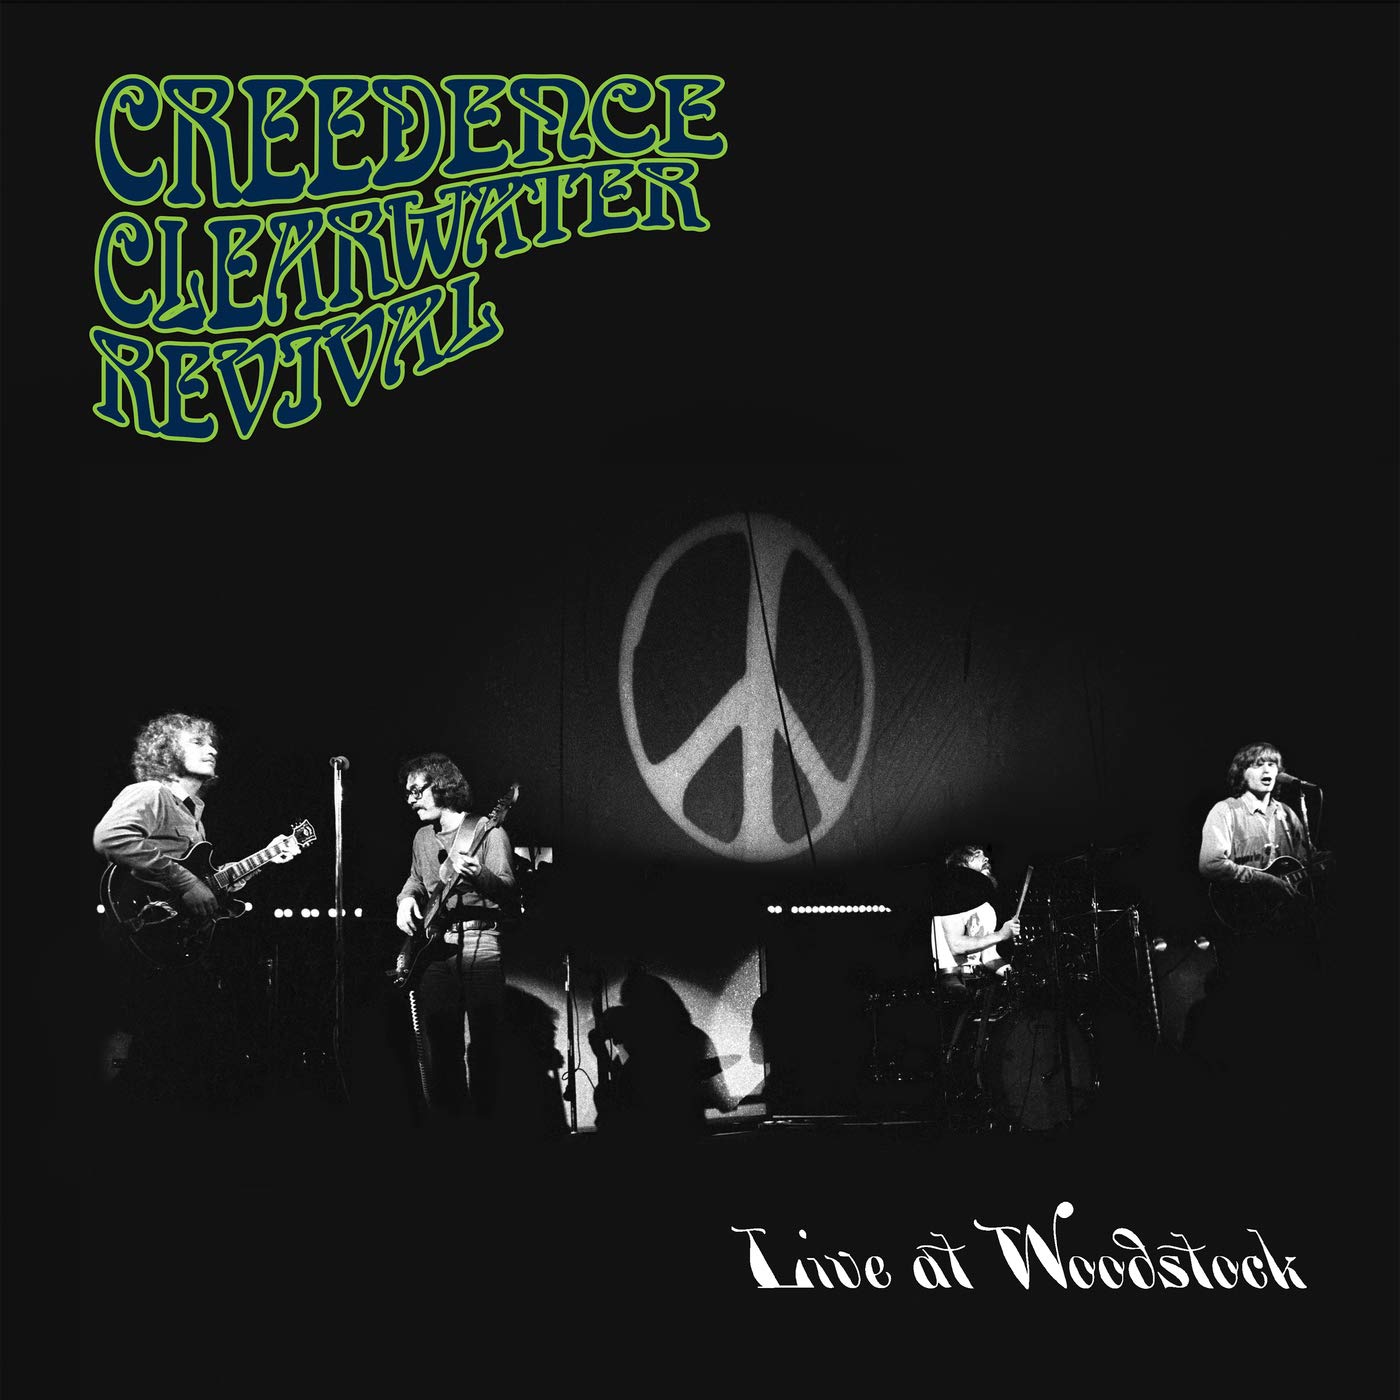 Live At Woodstock | Creedence Clearwater Revival carturesti.ro poza noua